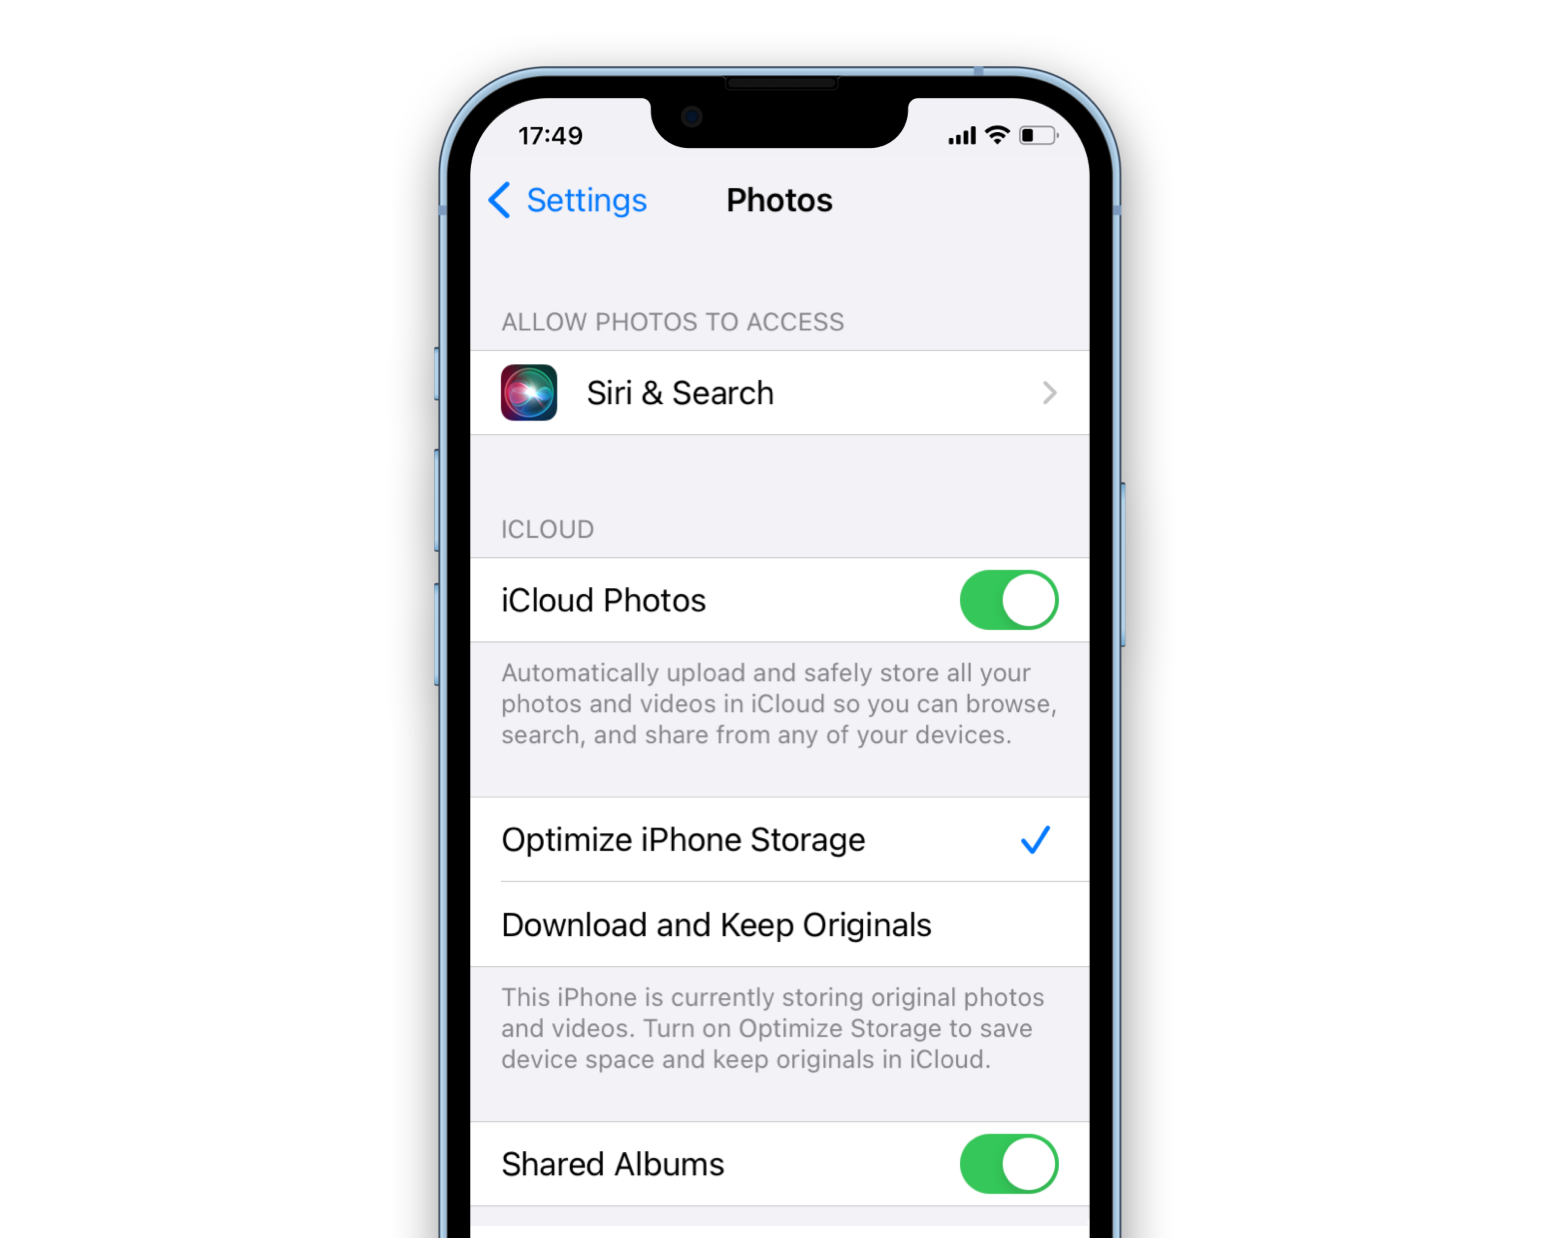 Optimize iPhone Storage with iCloud